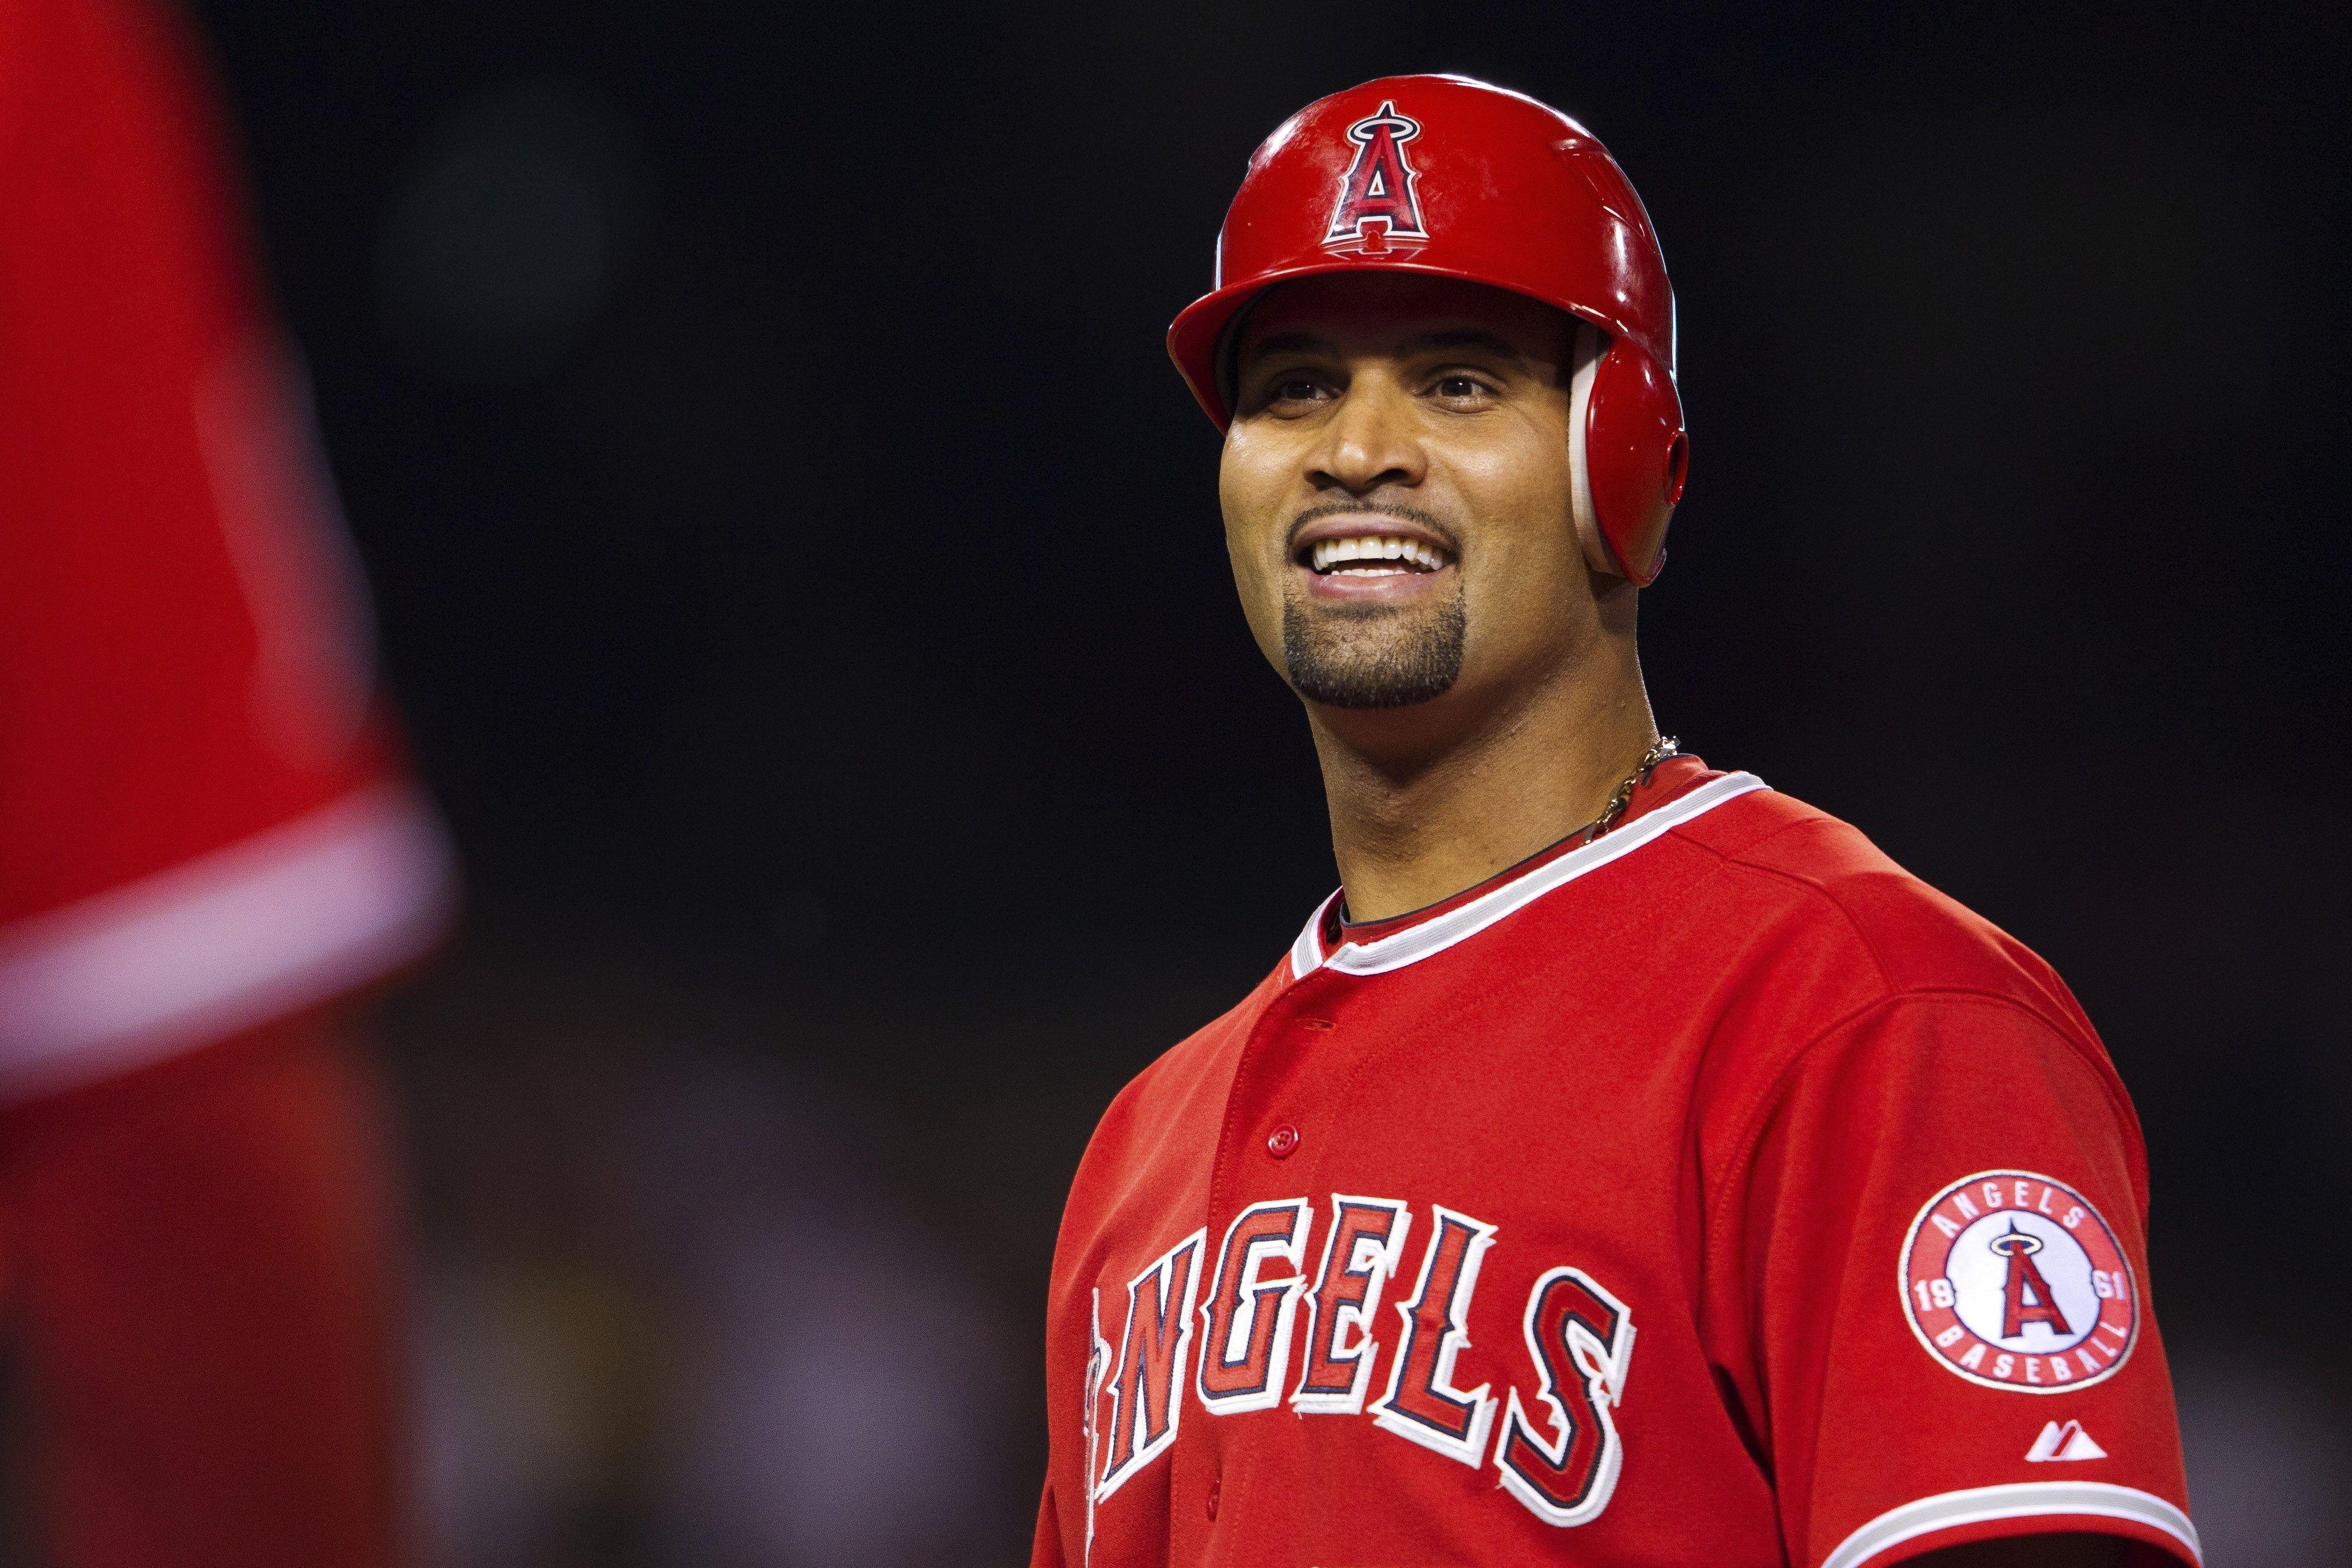 Angel's Albert Pujols Slump is one of the Most Expensive in MLB